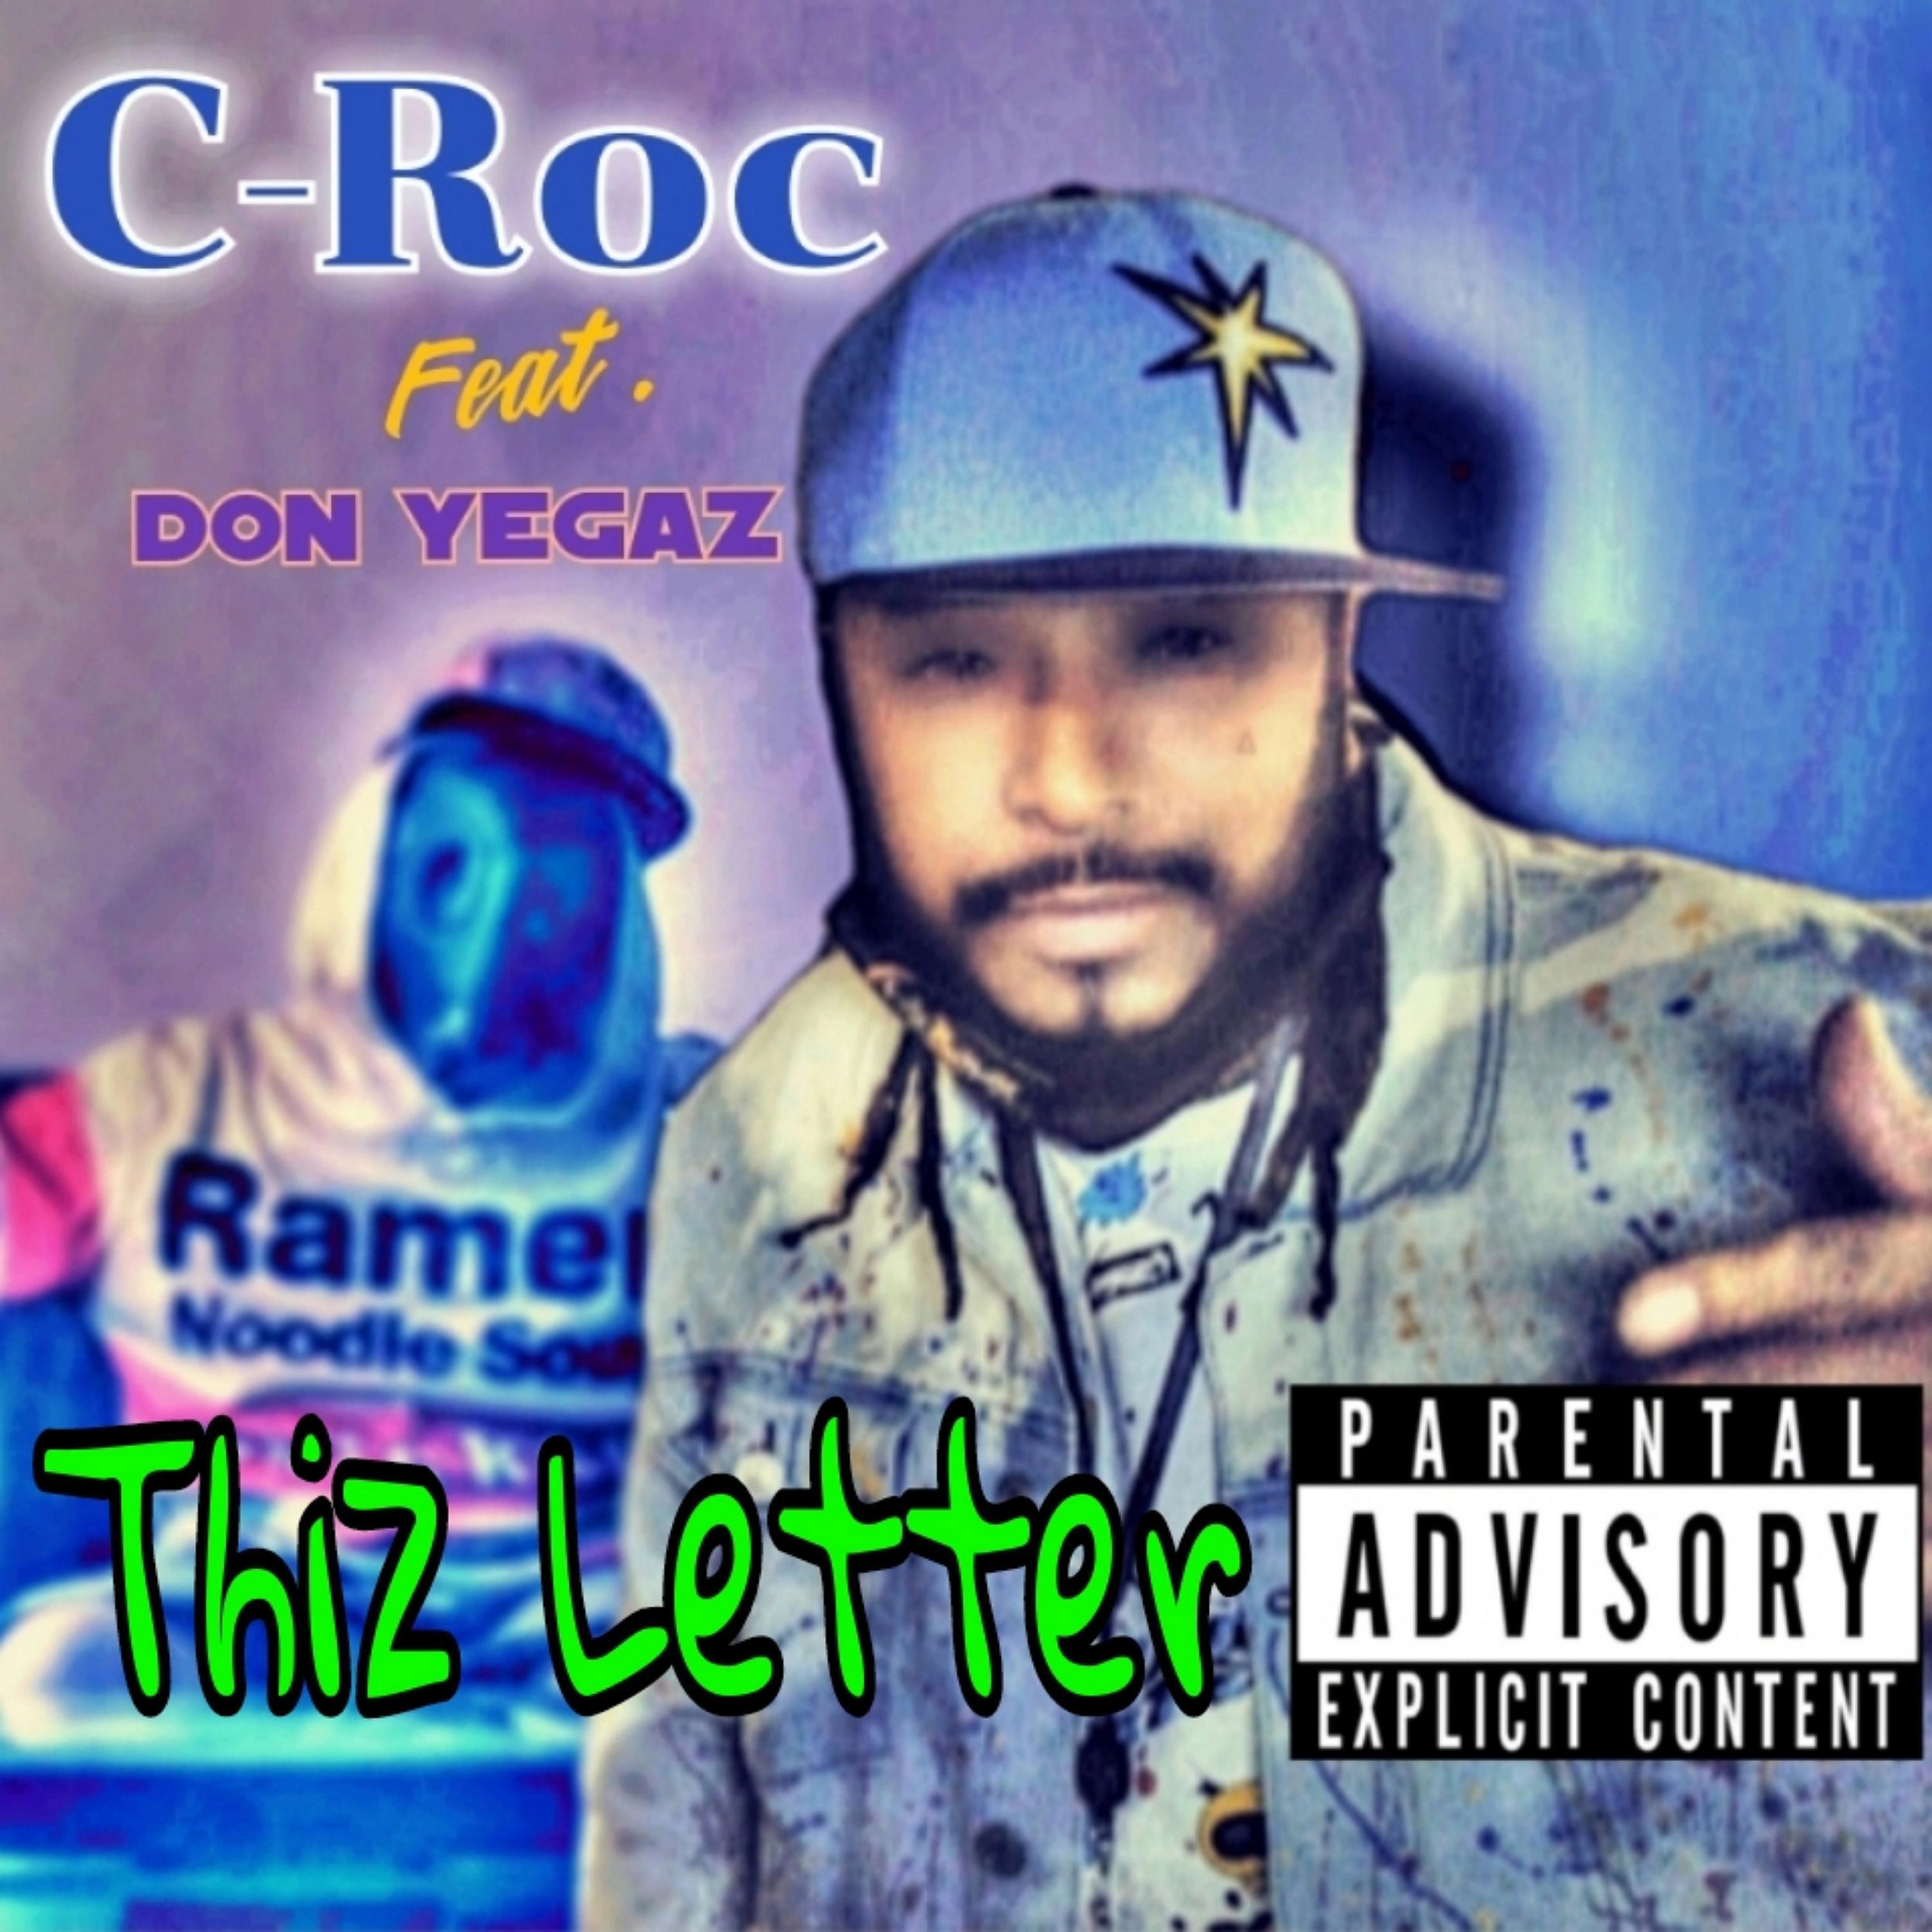 C-Roc from 818 - Thiz Letter (feat. Don Yegaz) (Remastered Version)